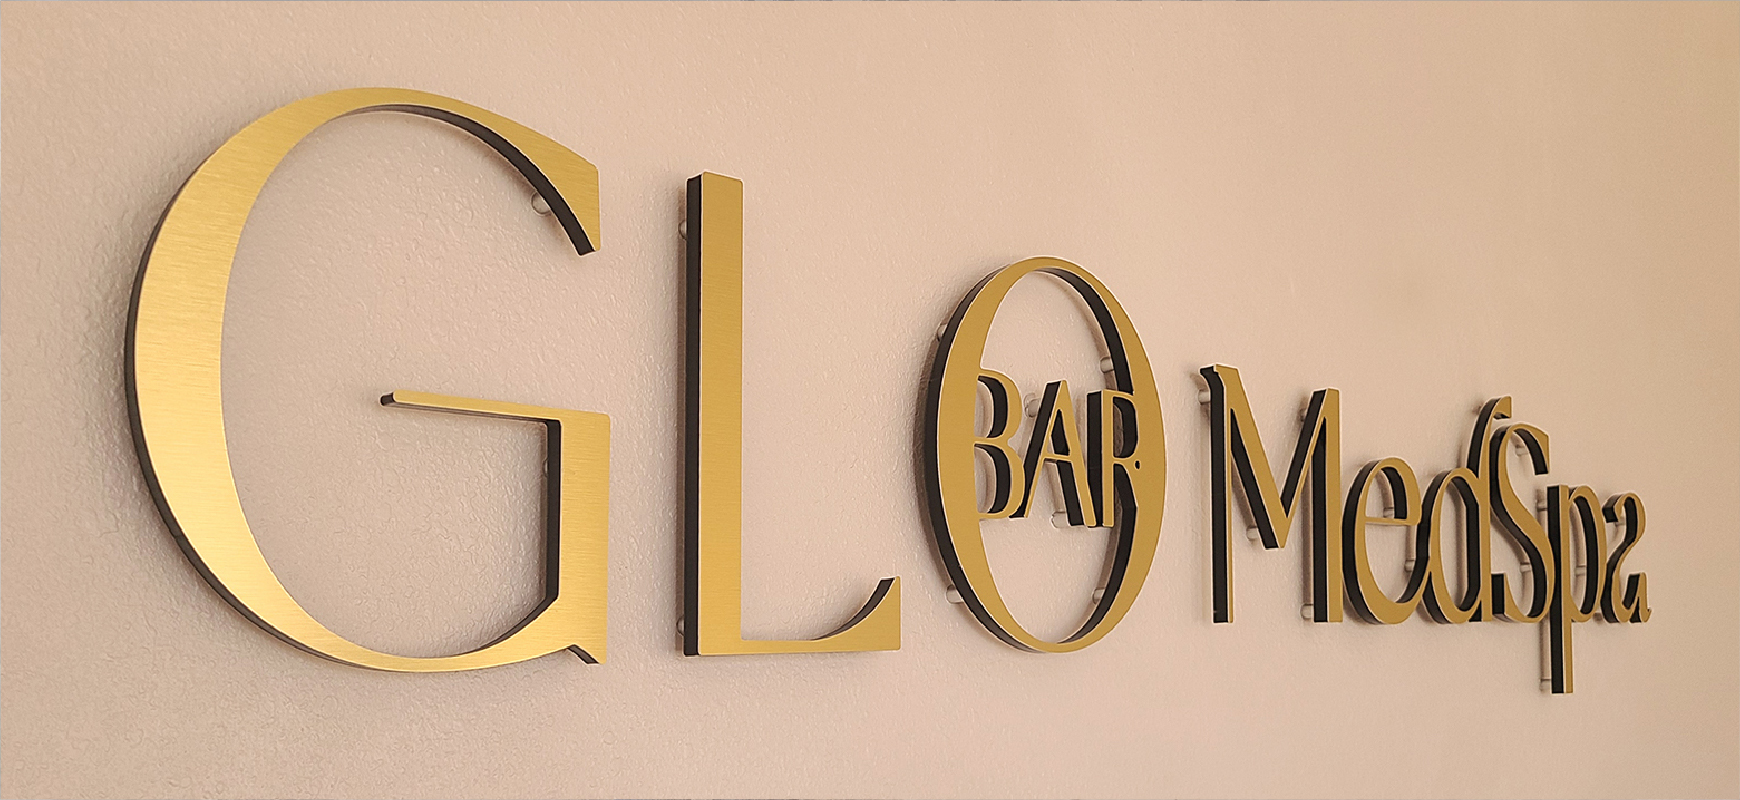 Glo Bar Med Spa letter signage with gold finish made of brushed aluminum for interior branding